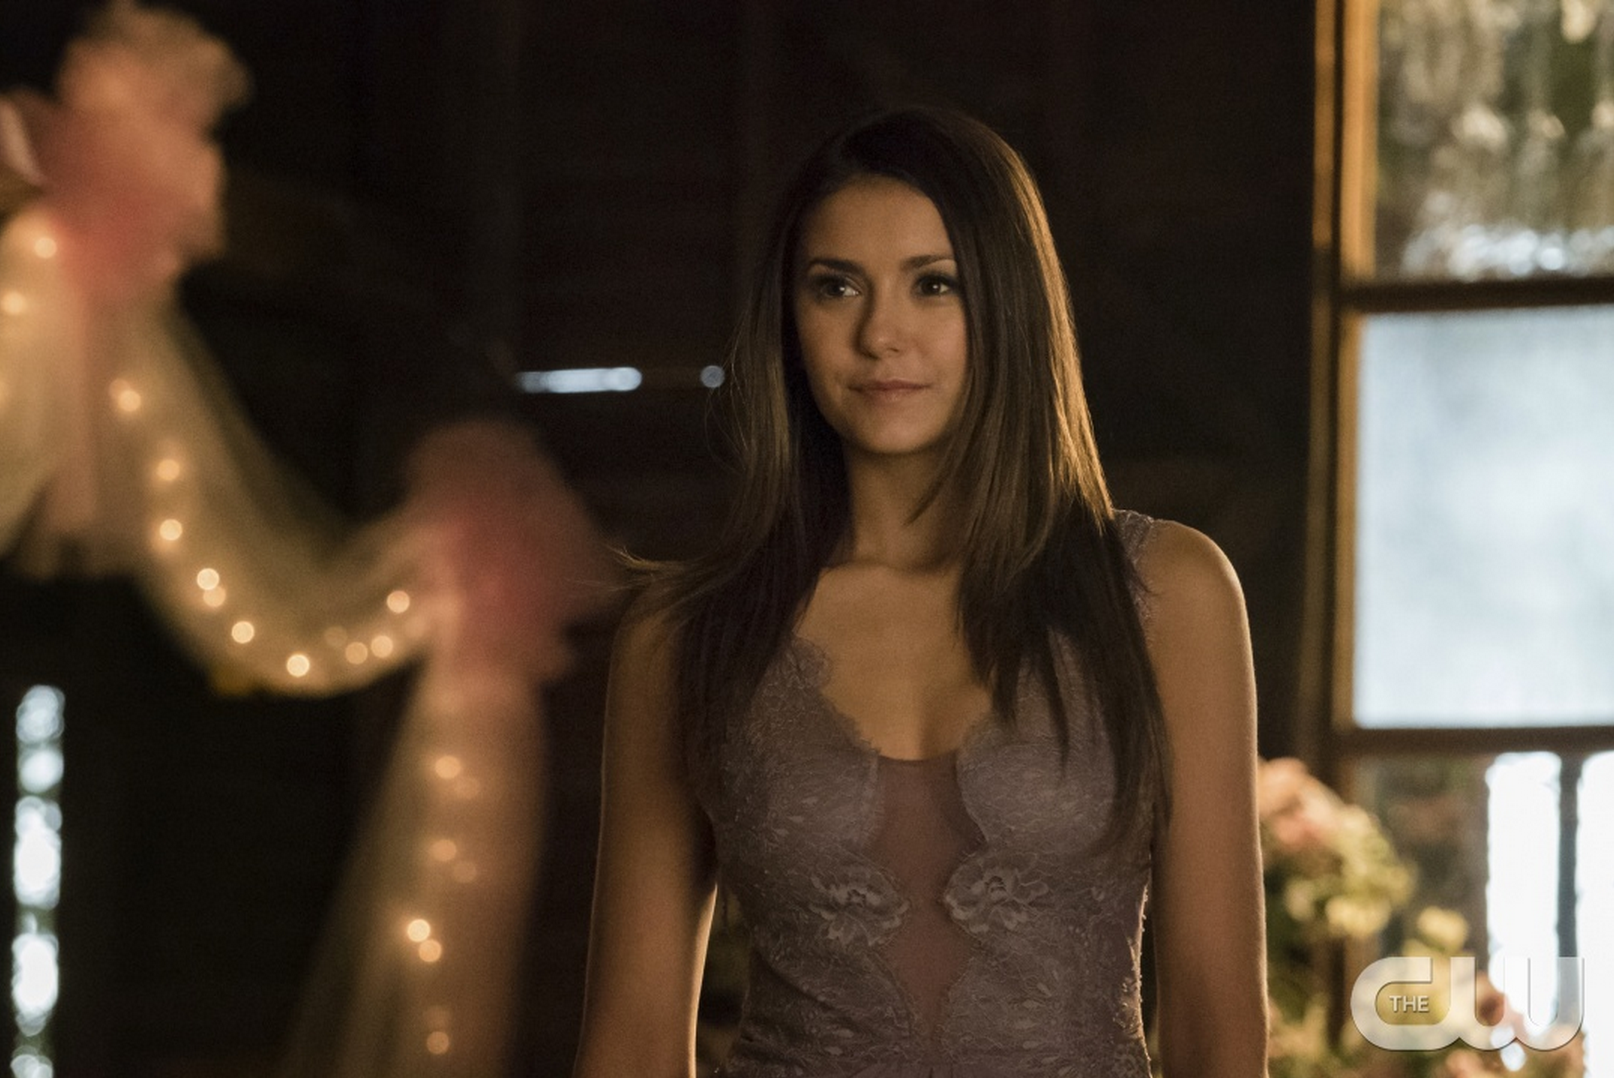 Vampire Diaries Season 6 Spoilers Will The Finale Have A Cliffhanger Julie Plec Reveals How